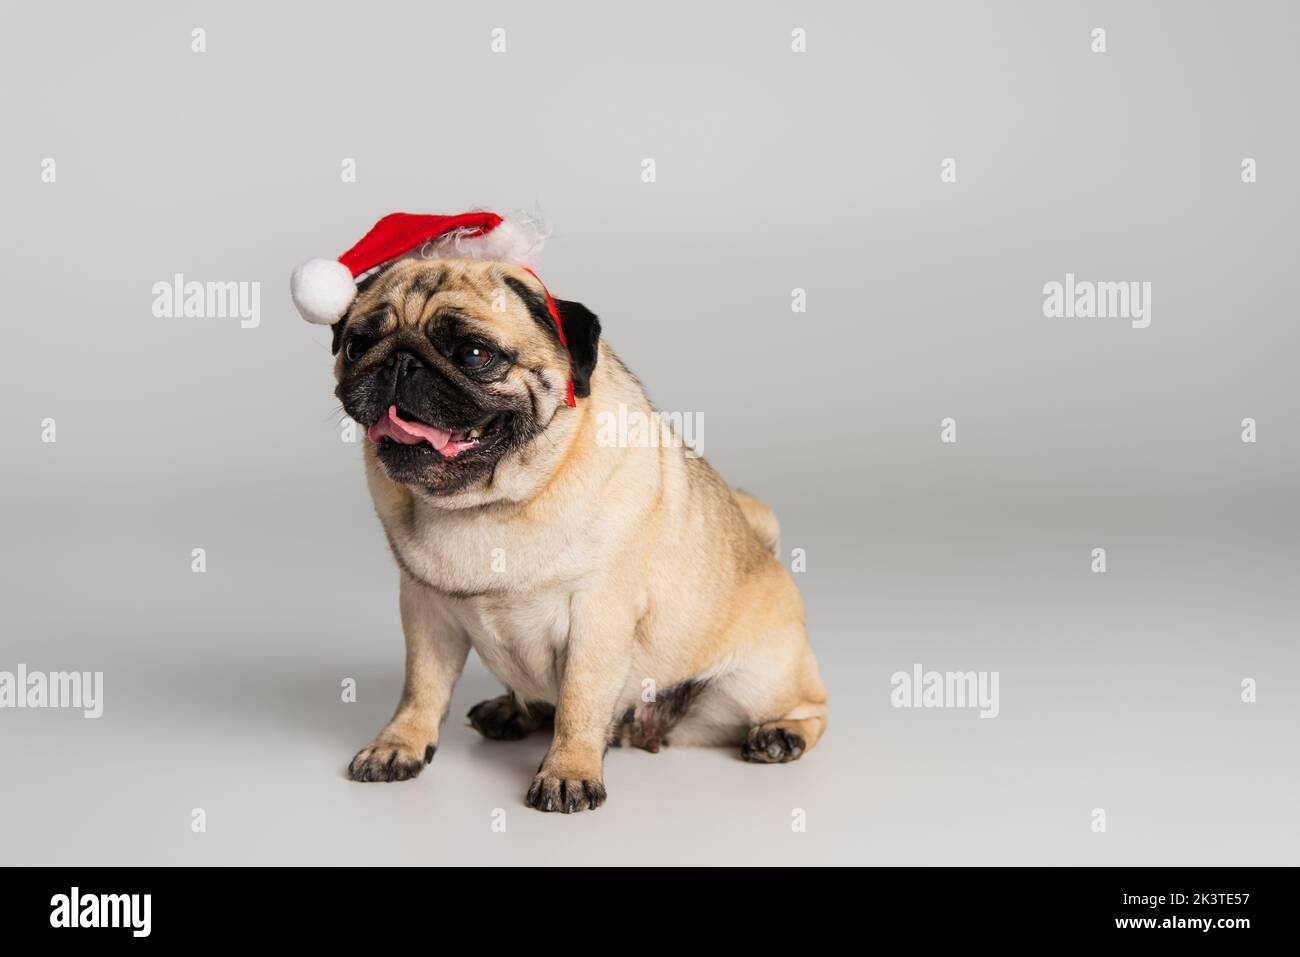 purebred pug dog in santa hat sticking out tongue and sitting on grey background,stock image Stock Photo